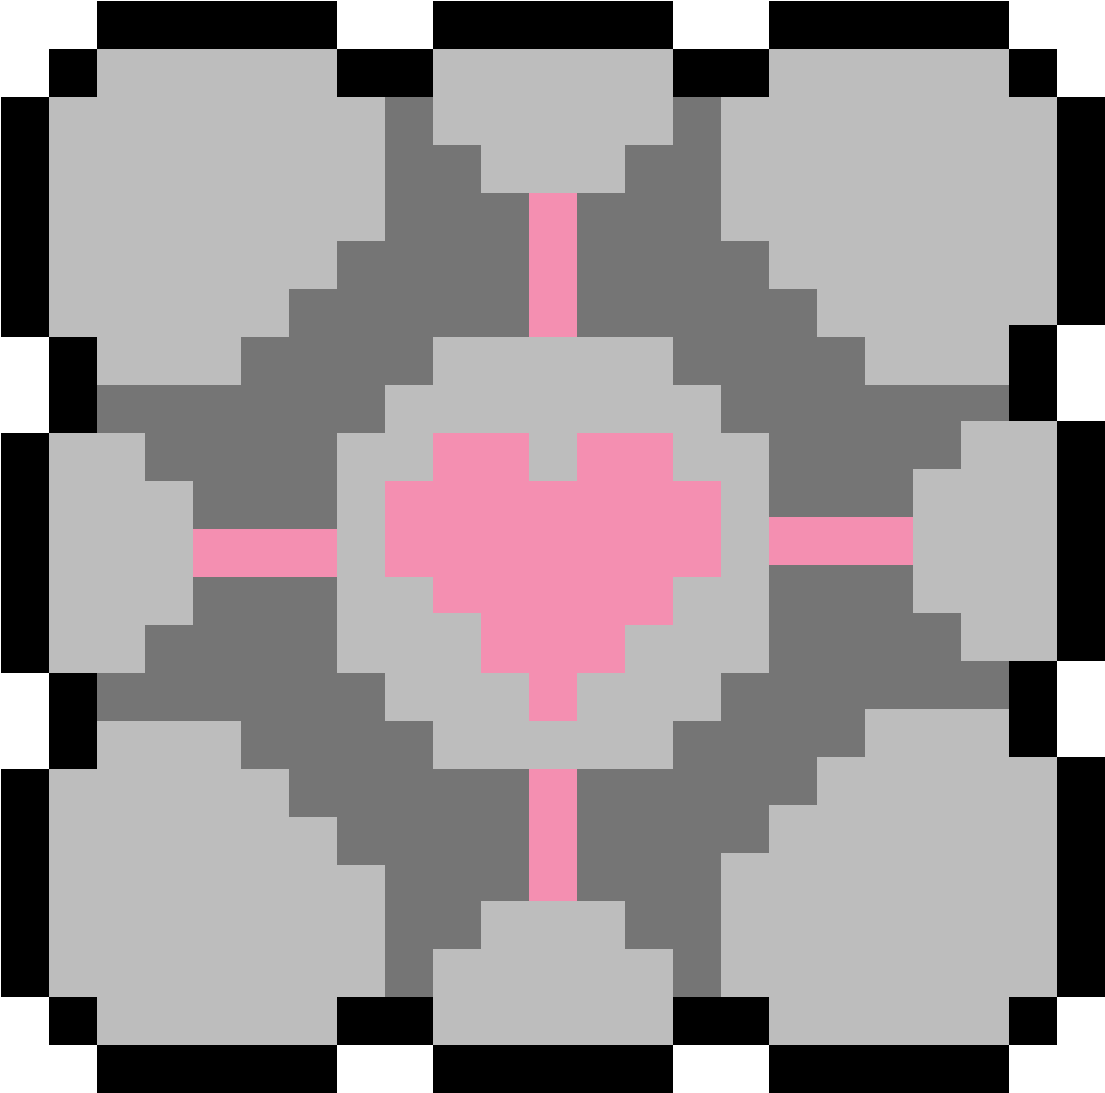 A Pixelated Image Of A Heart